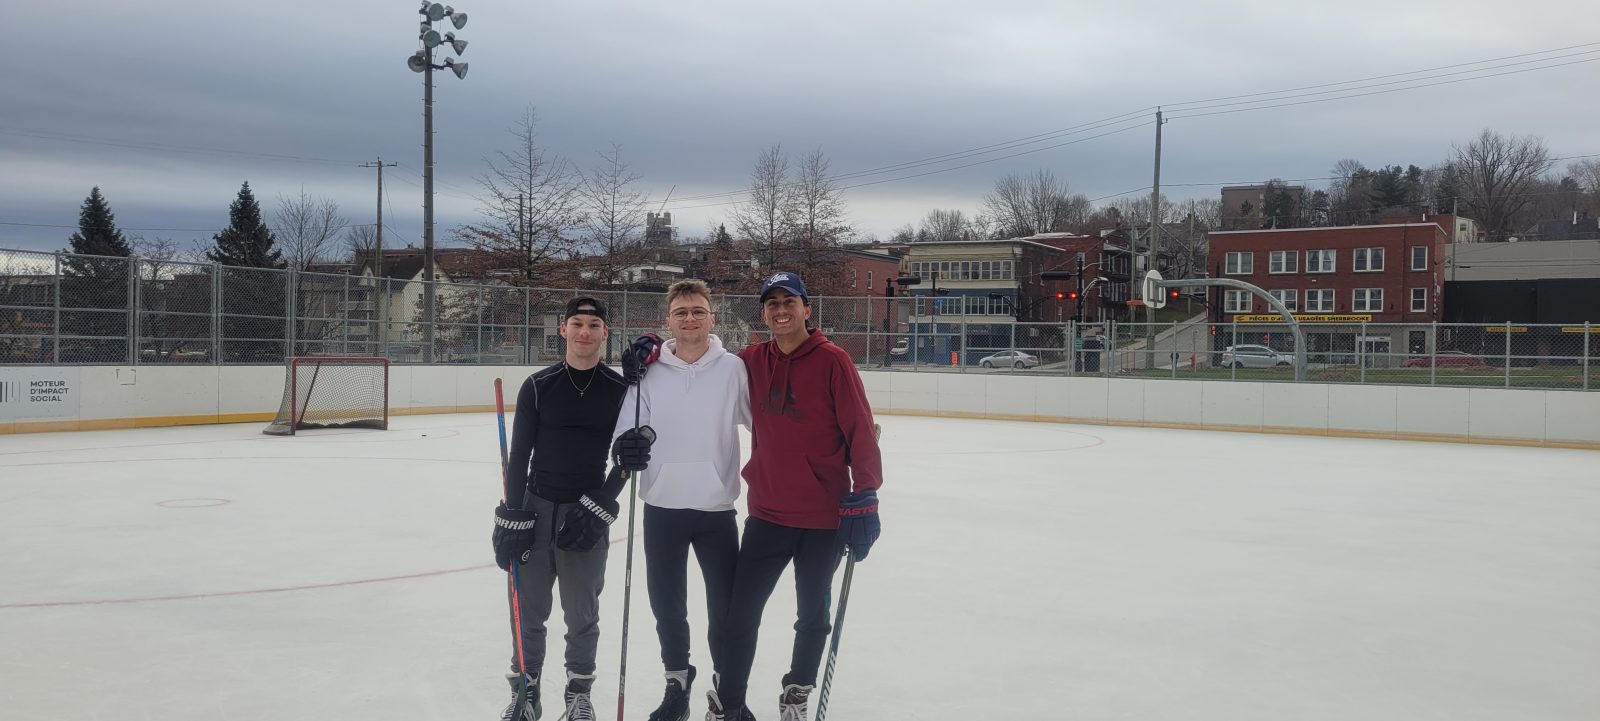 Outdoor skating season off to a wet start in Sherbrooke